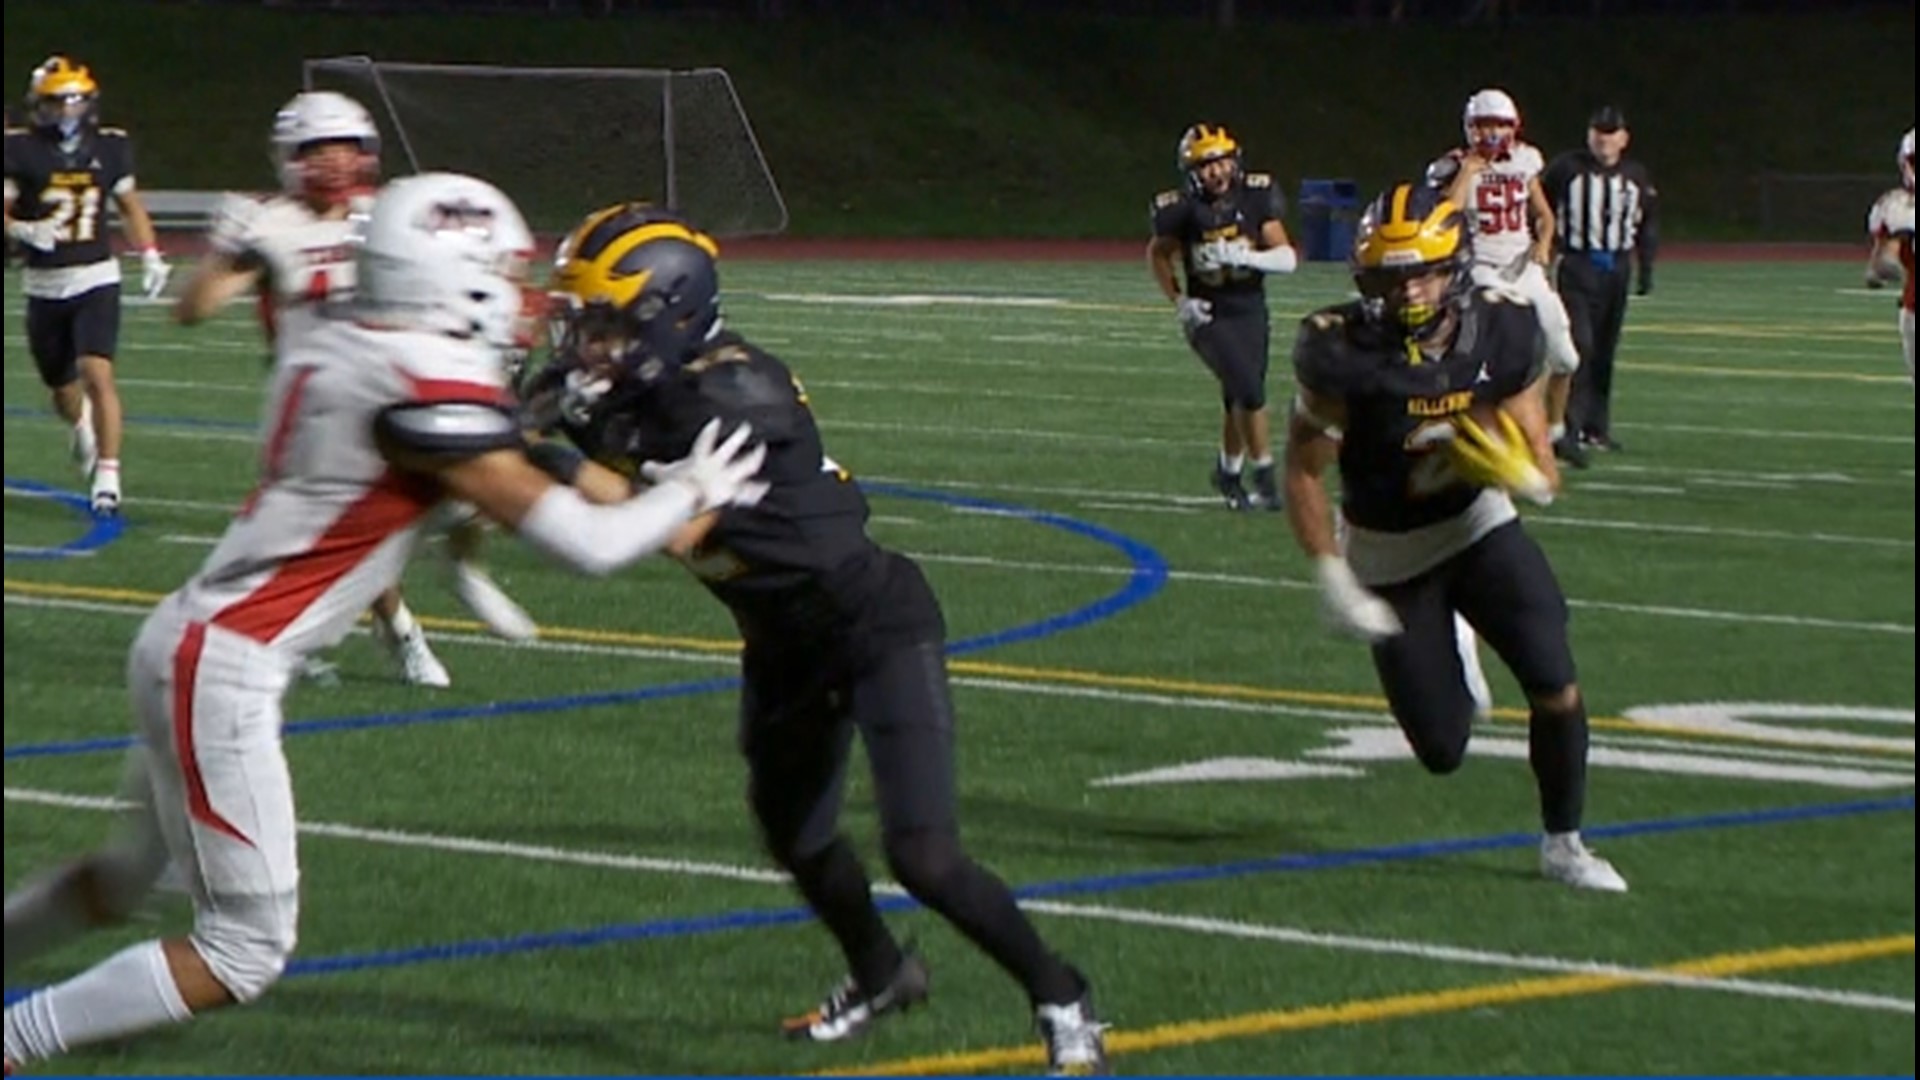 Highlights of Bellevue's 49-7 playoff win over Mountlake Terrace